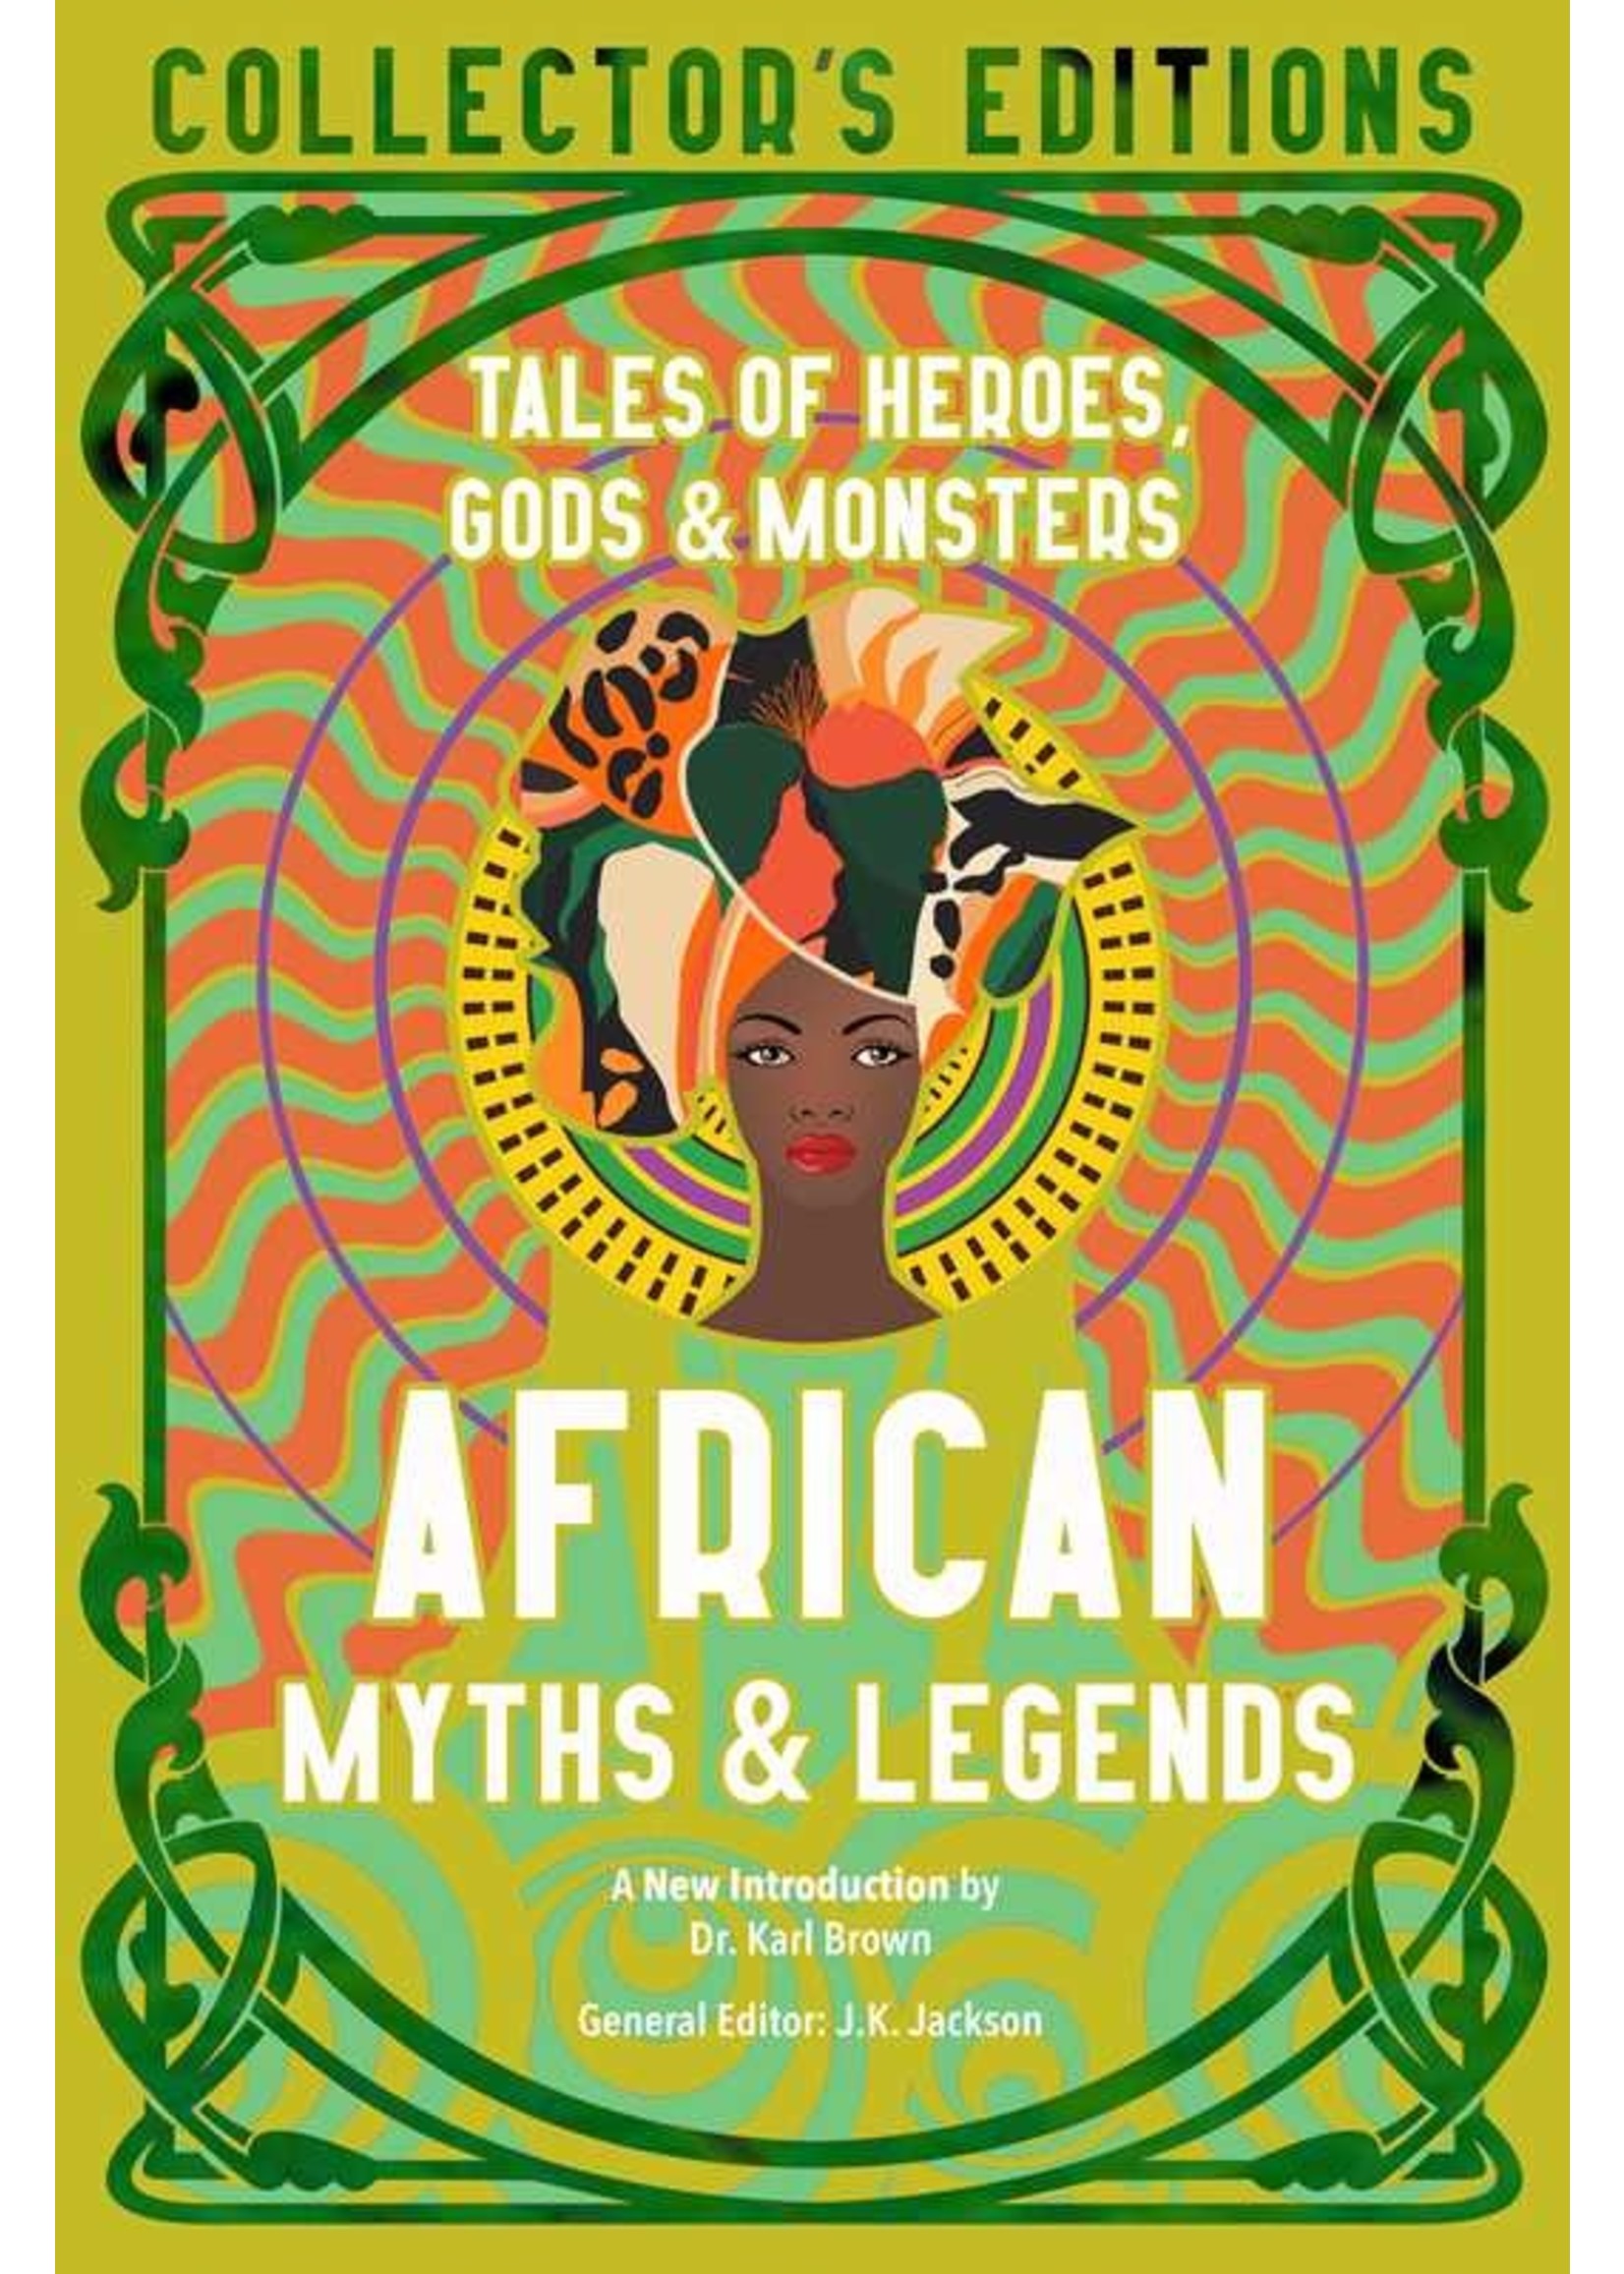 African Myths & Legends: Tales of Heroes, Gods & Monsters by J.K. Jackson